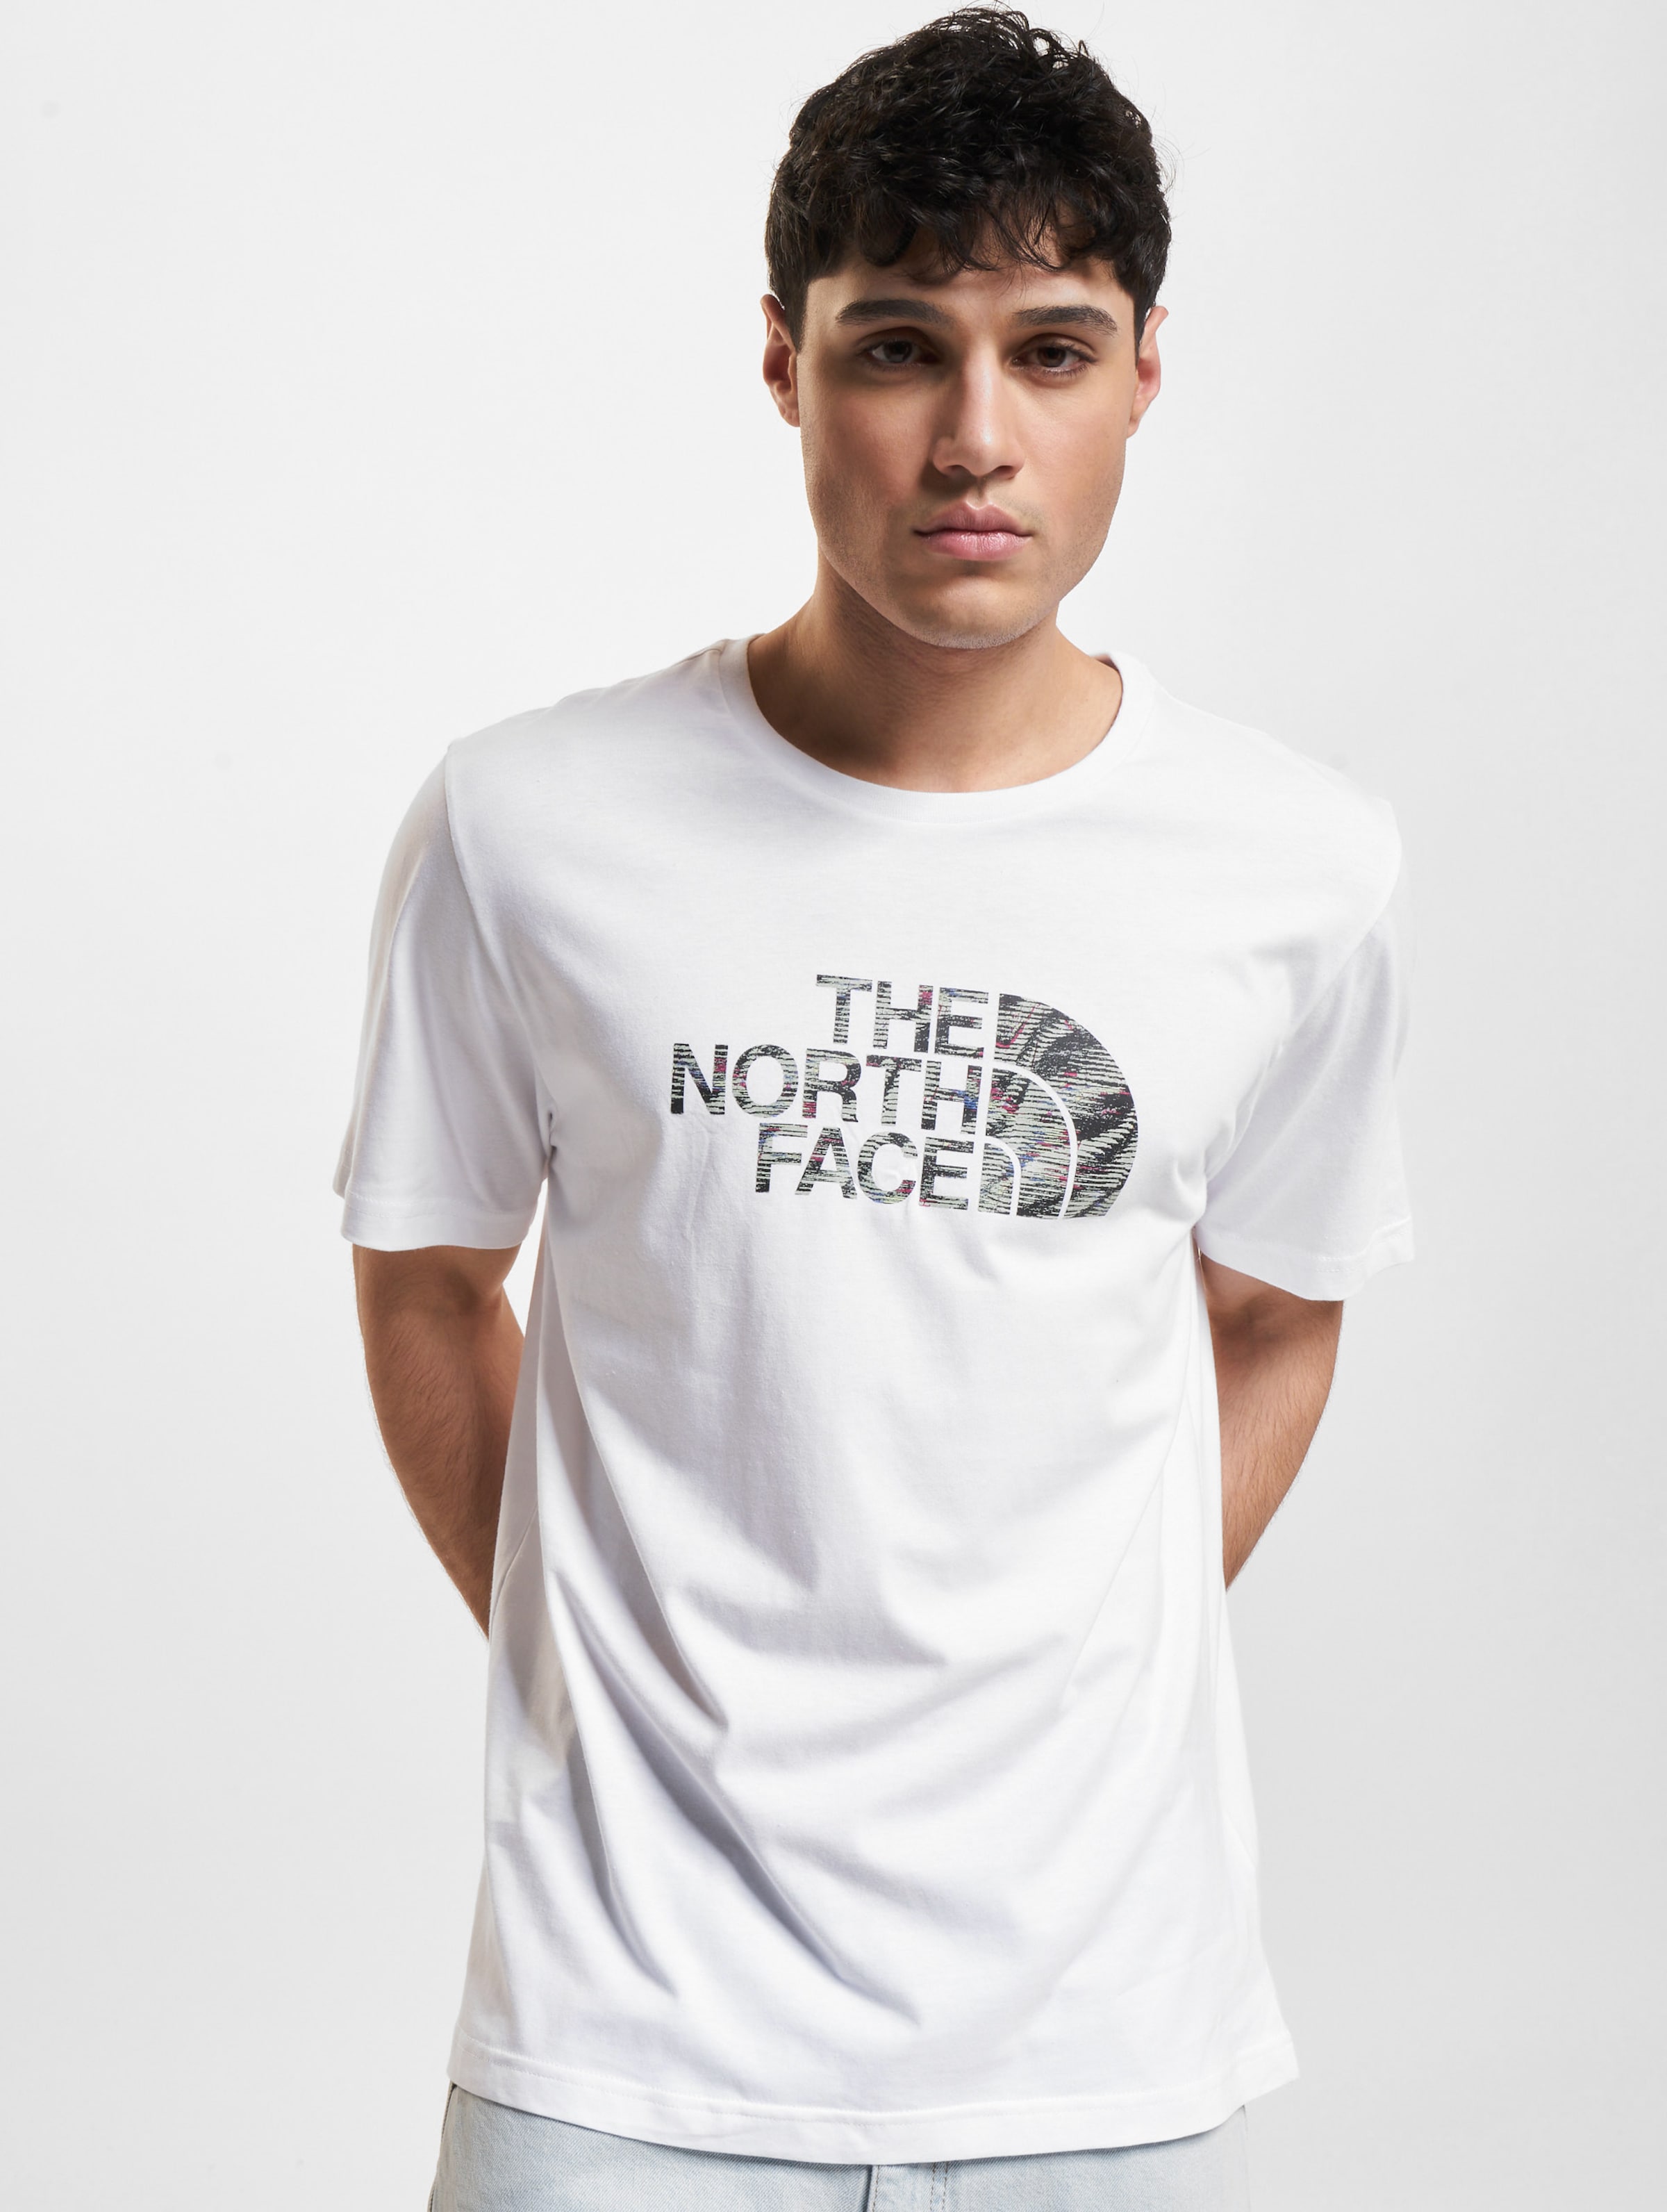 The North Face Easy T-Shirts Mannen op kleur wit, Maat S